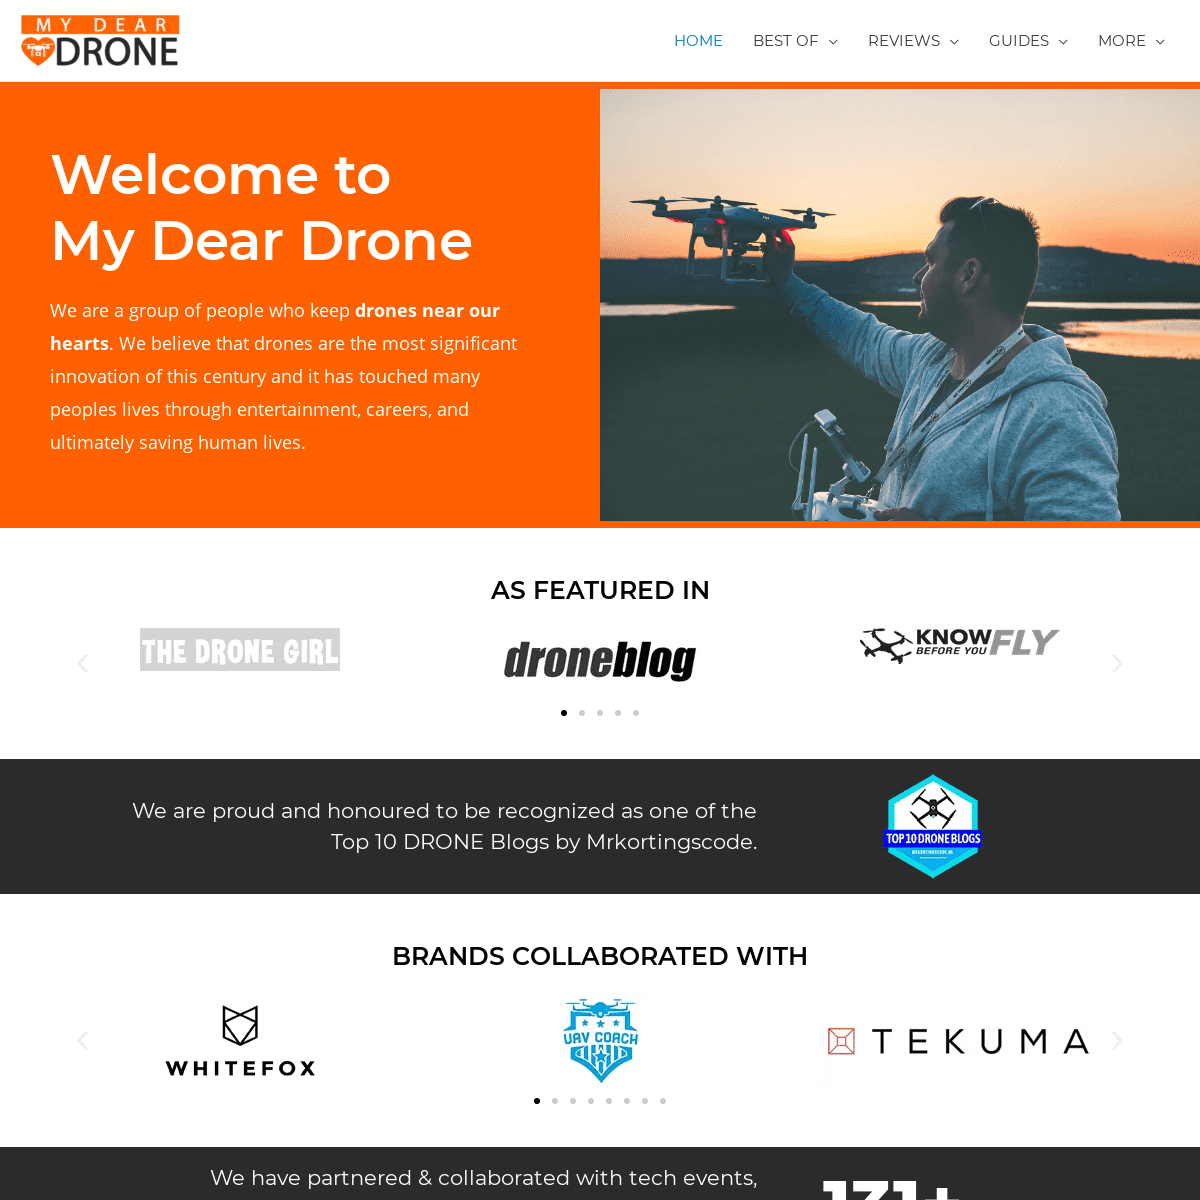 A complete backup of https://mydeardrone.com